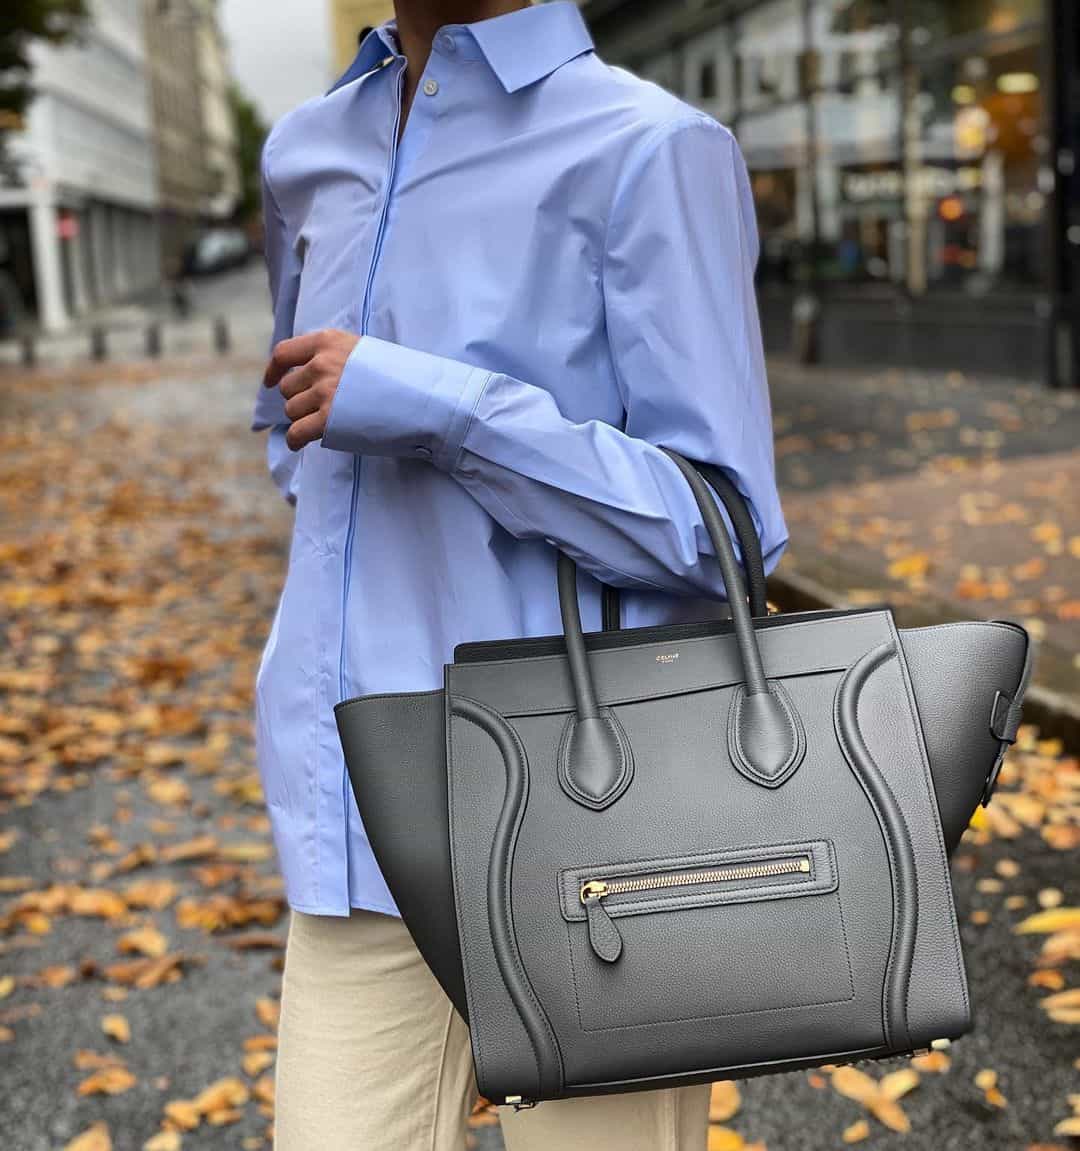 Celine Luggage Tote Discover the Top 10 Luxurious Handbags Every Woman Should Know About - 14